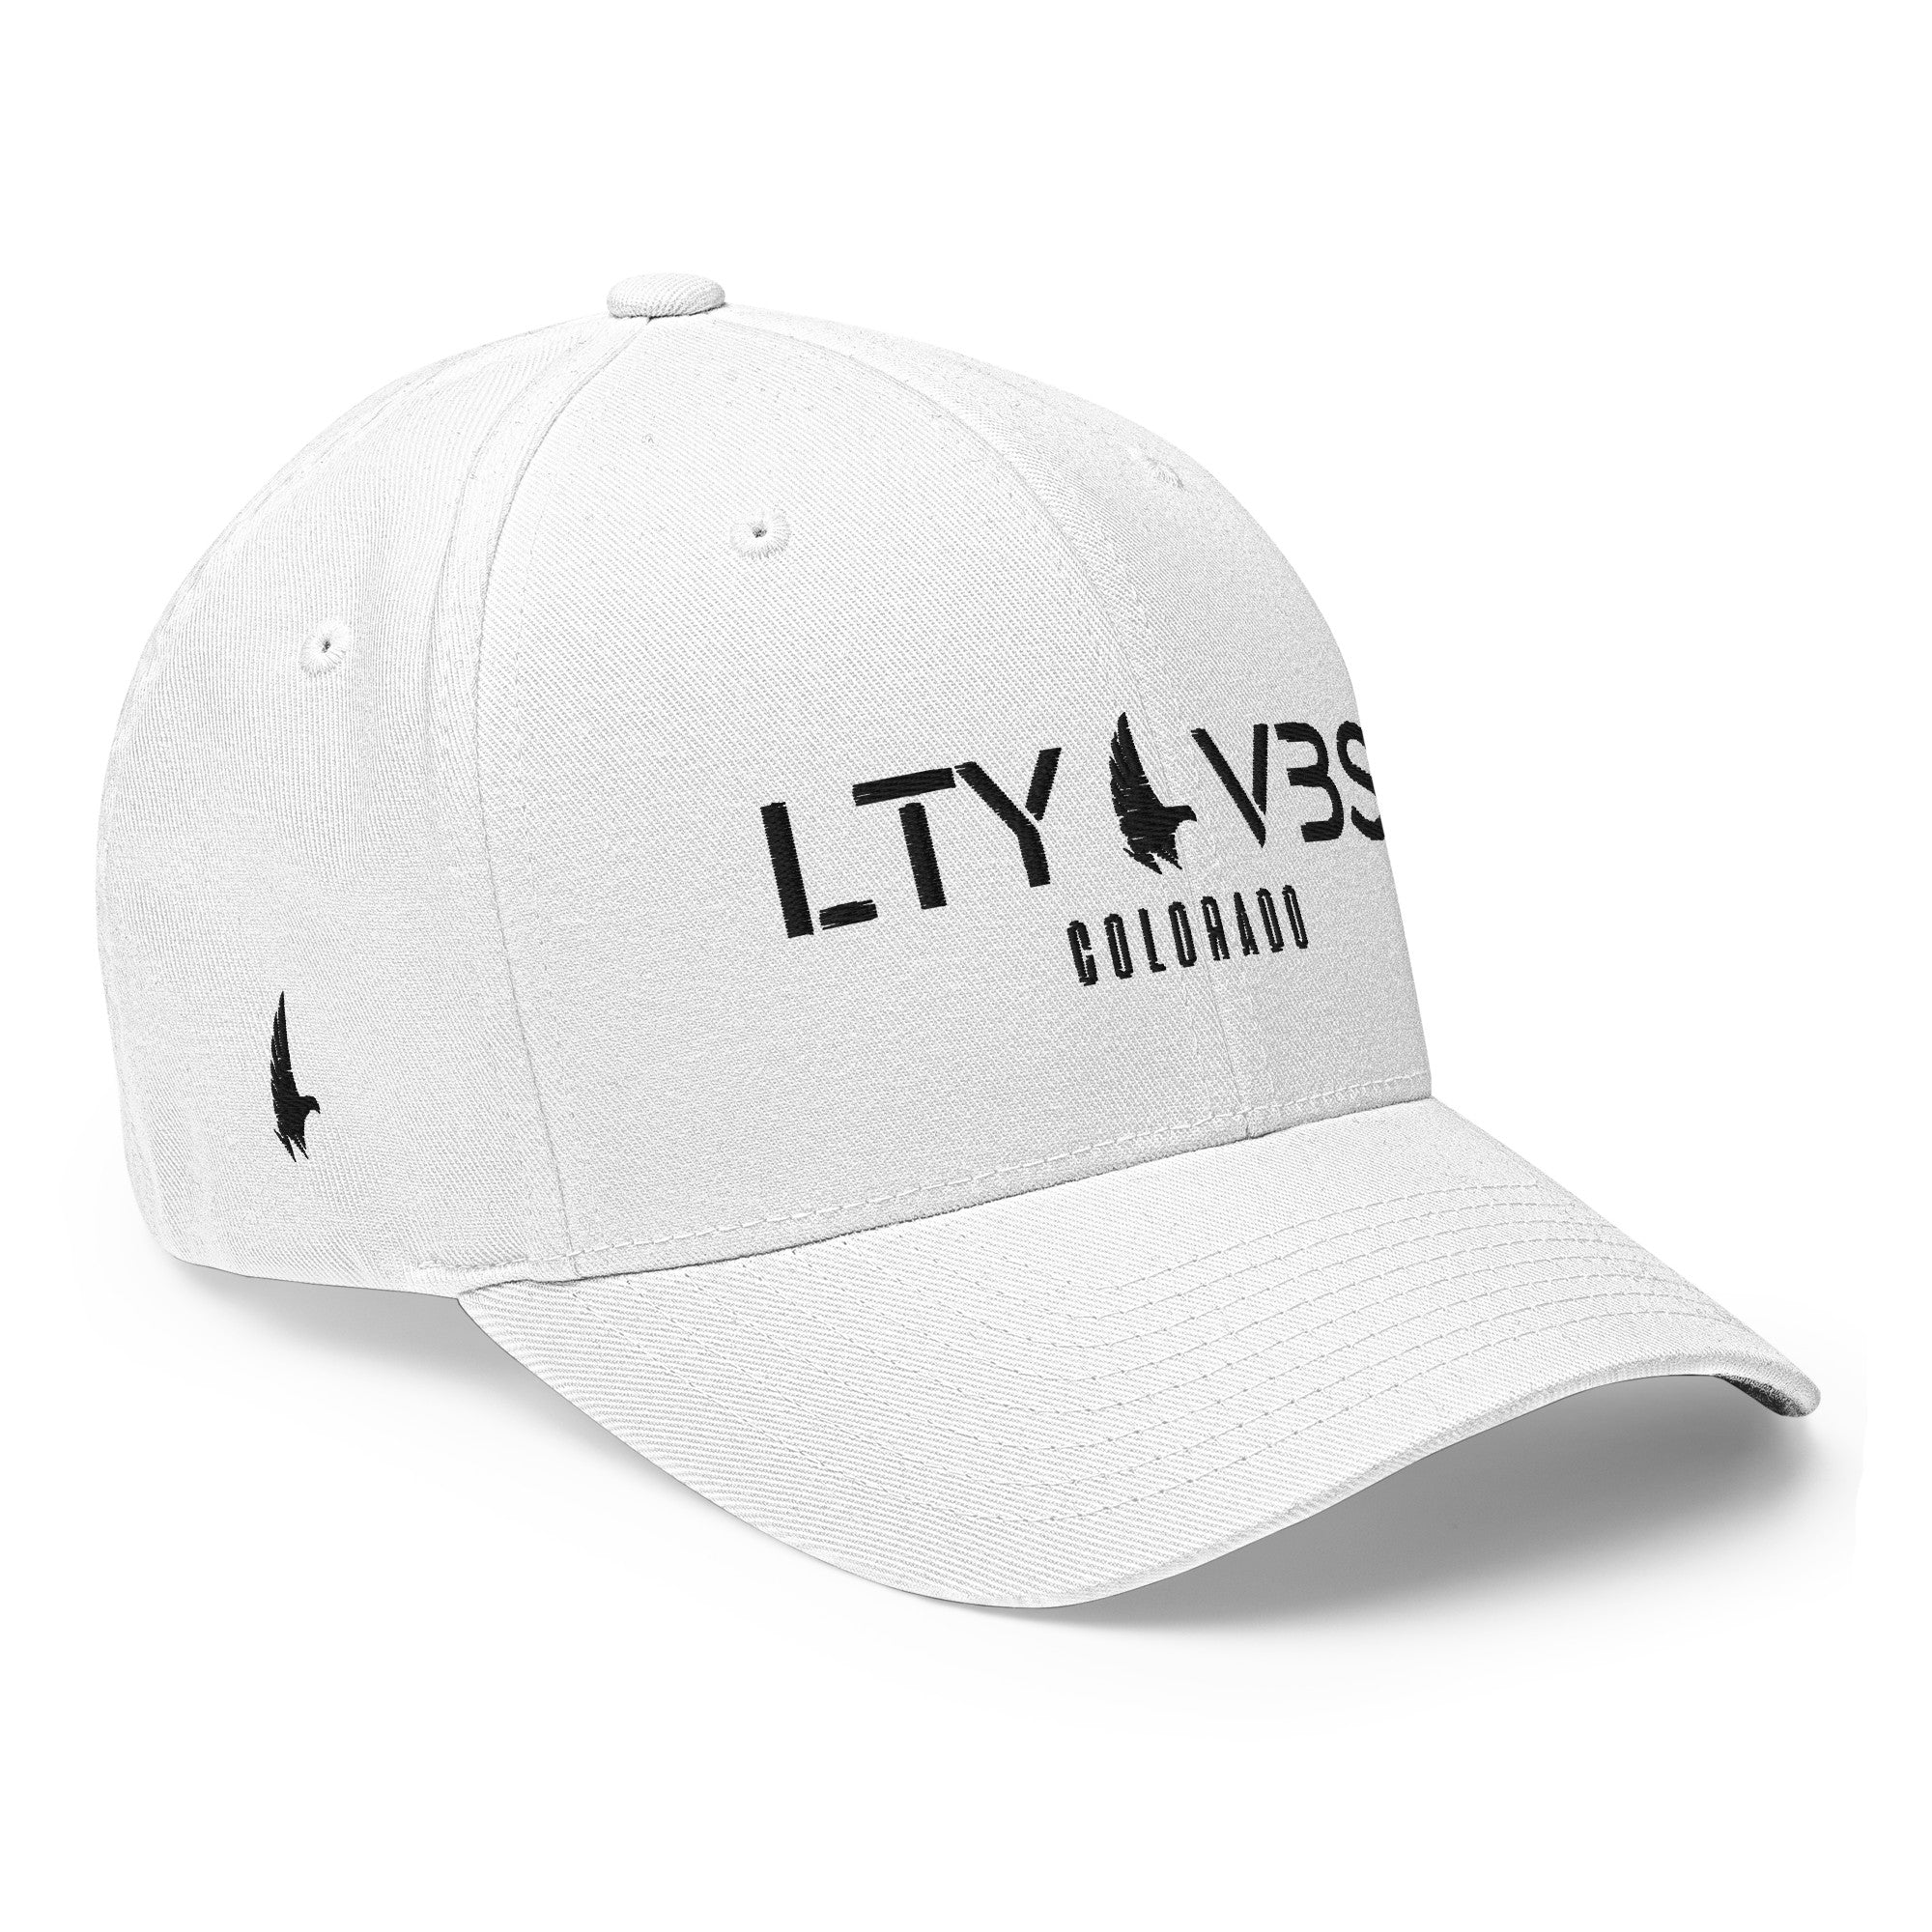 Loyalty Era Colorado Fitted Hat - - Loyalty Vibes